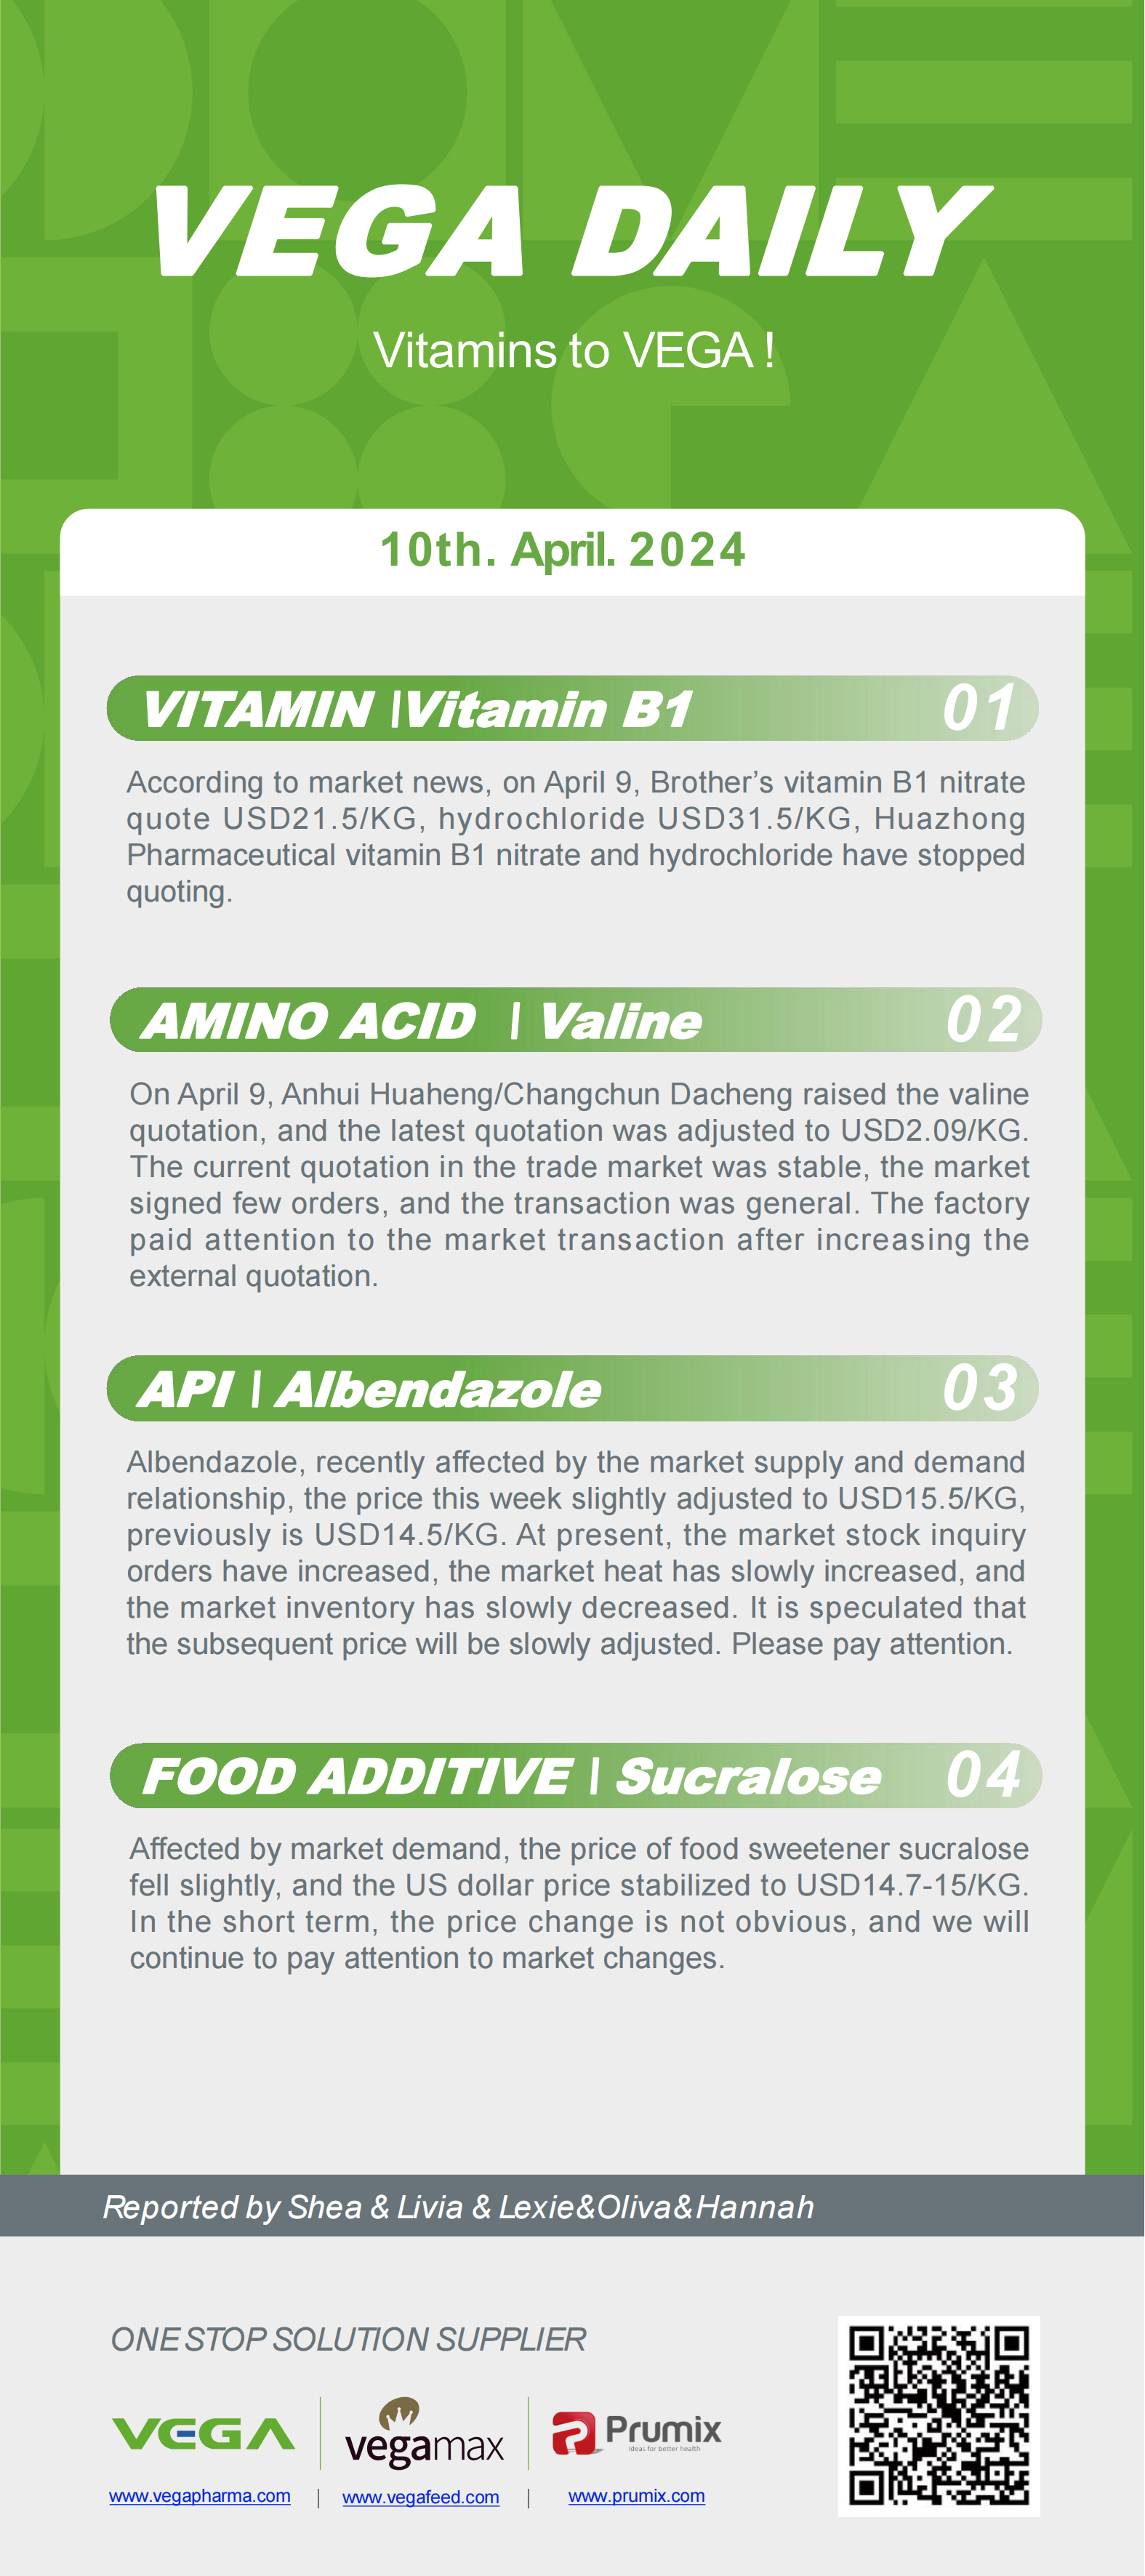 Vega Daily Dated on Apr 10th 2024 Vitamin Amino Acid APl Food Additives.png